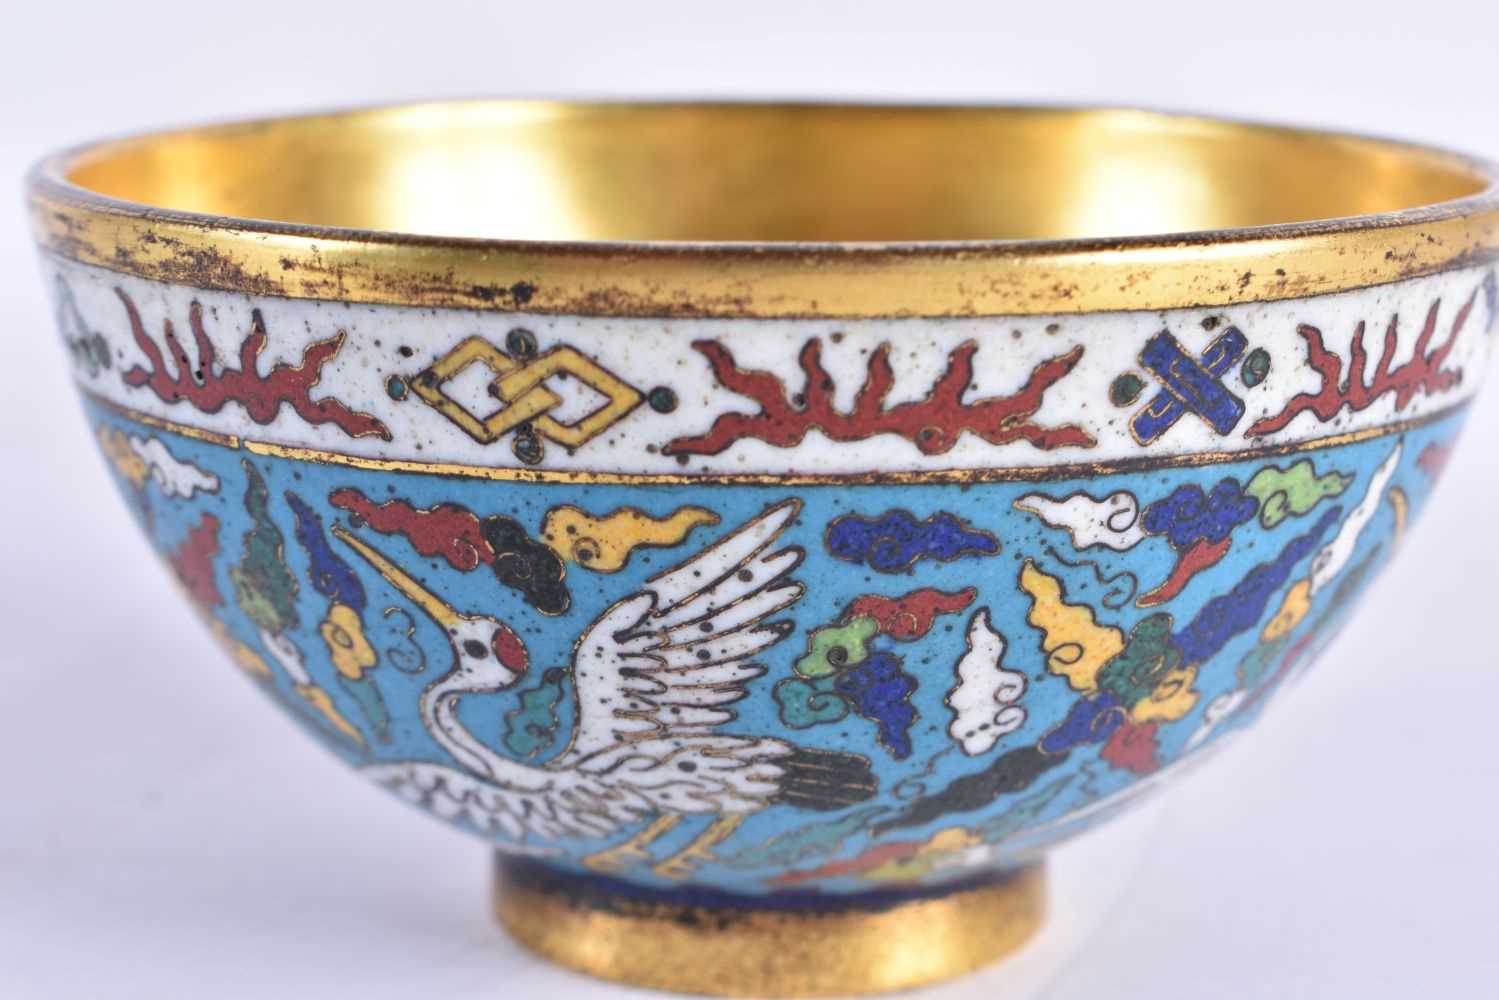 A FINE PAIR OF CLOISONNE ENAMEL BRONZE BOWLS Jiajing mark and probably of the period, decorated on a - Image 10 of 16